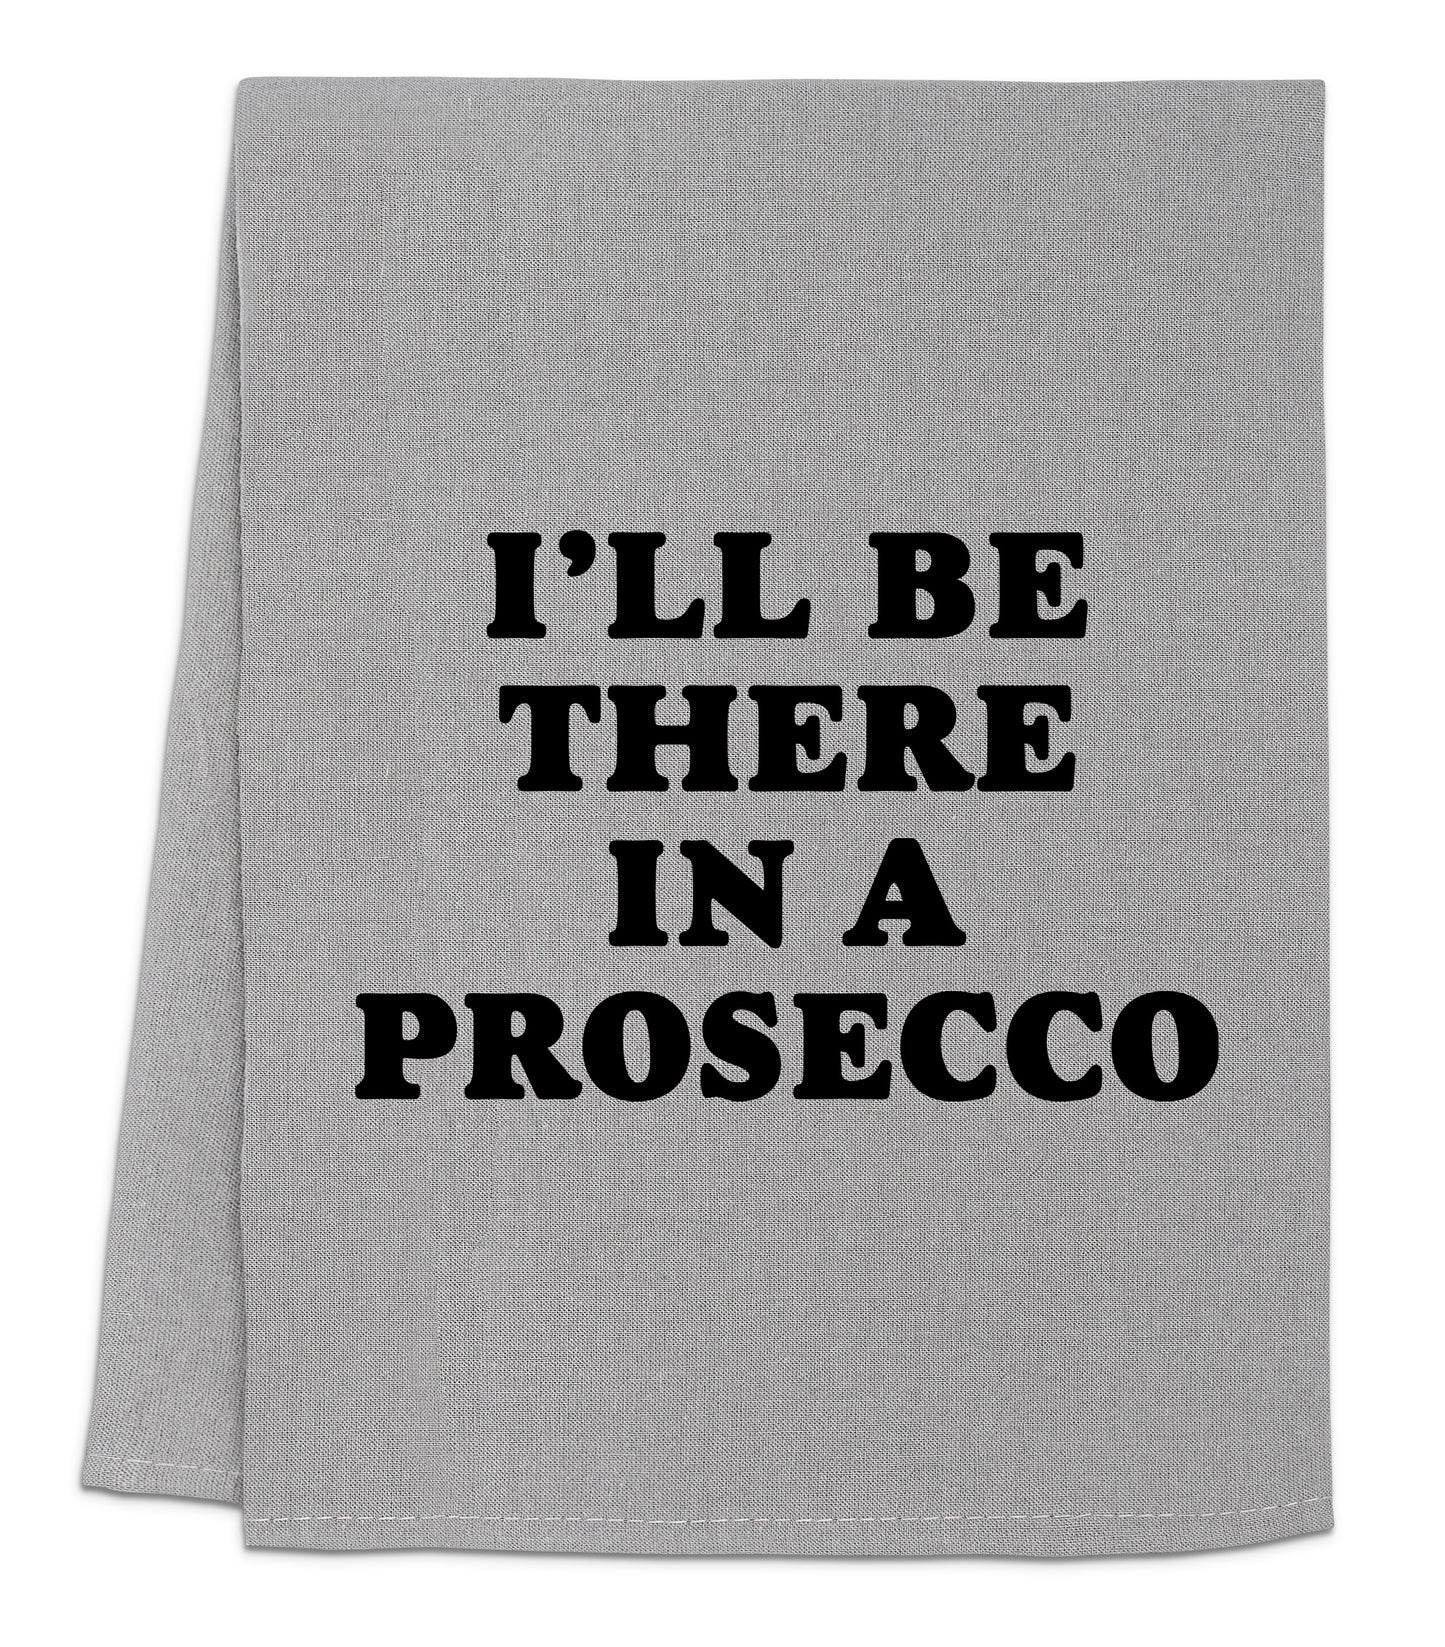 a towel that says i'll be there in a prosecco